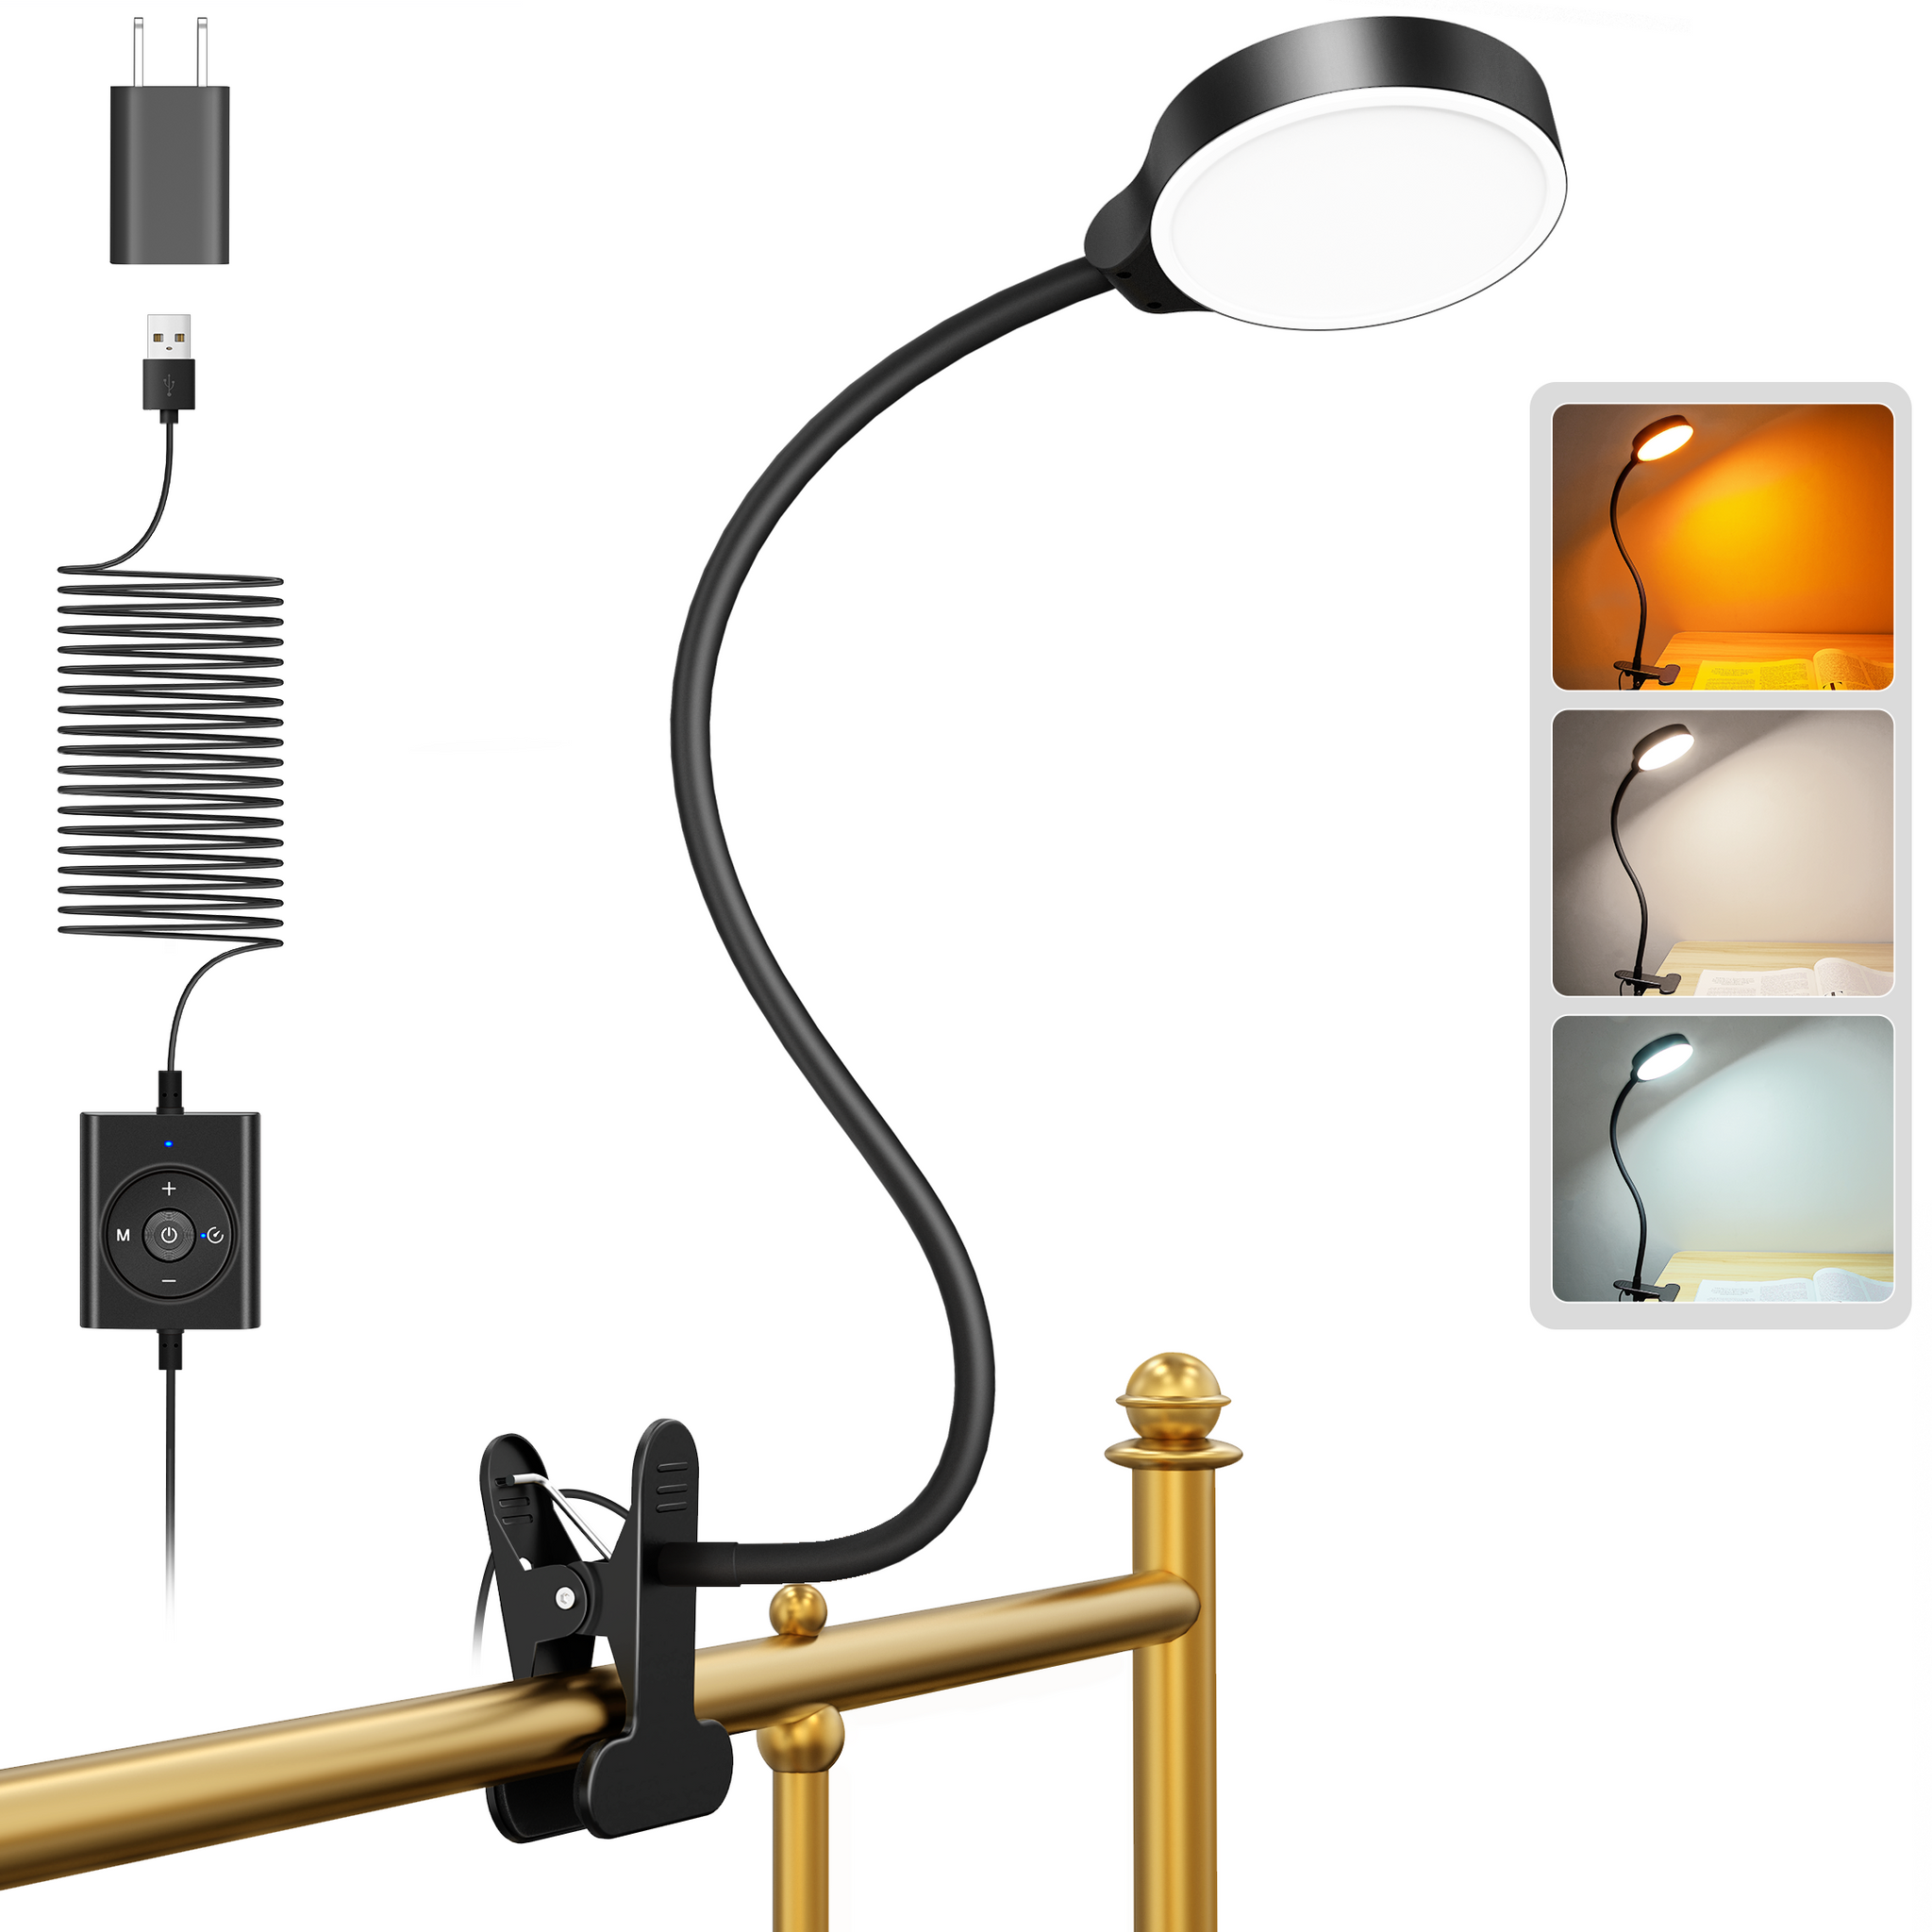 Highly rated reading lamps - Reviewed